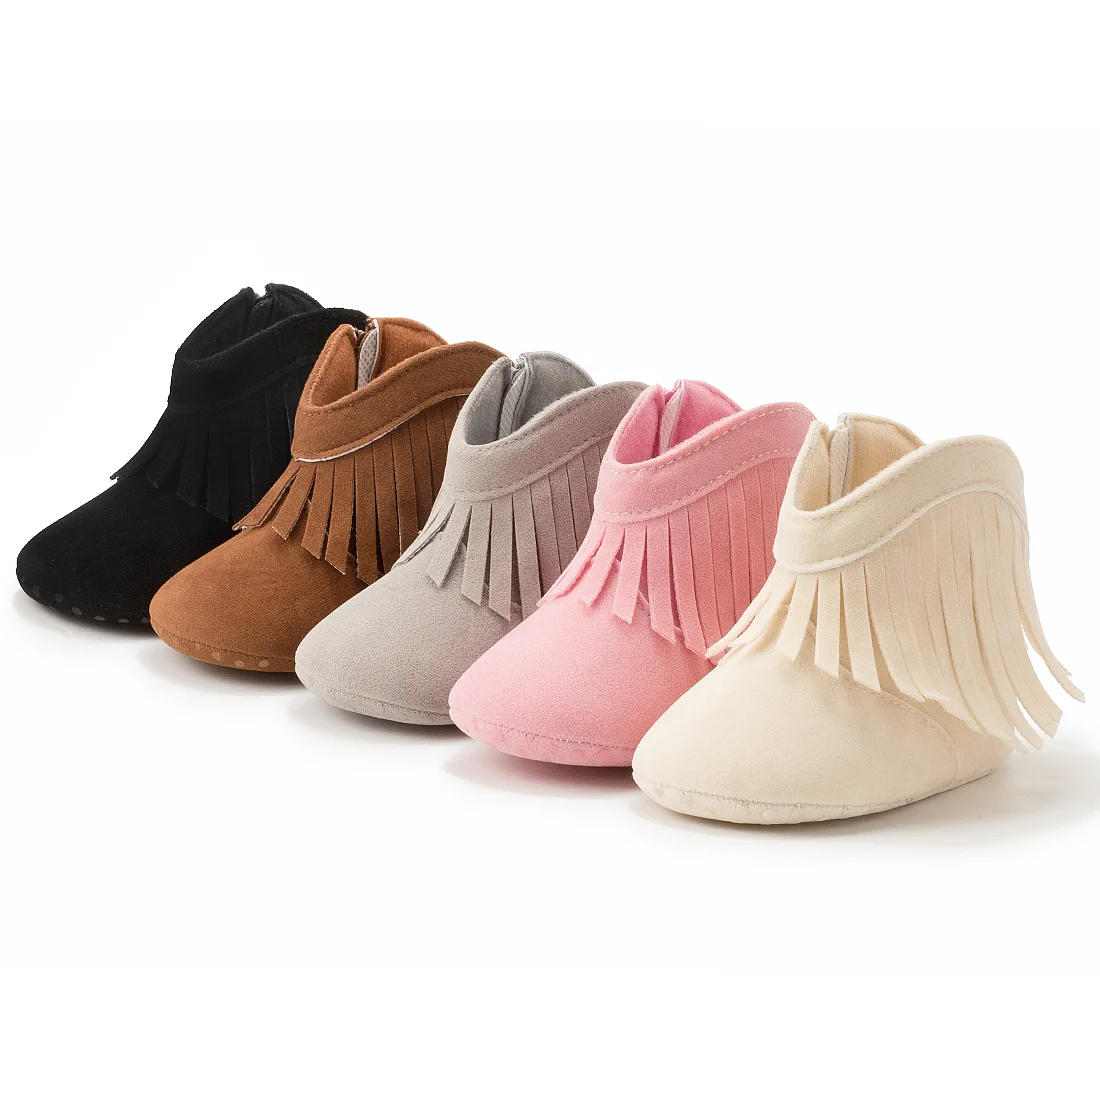 

MOQ 1 Comfortable Winter Tassel Newborn Infant Booties Girls Baby Cowboy Boots for Toddler Boys